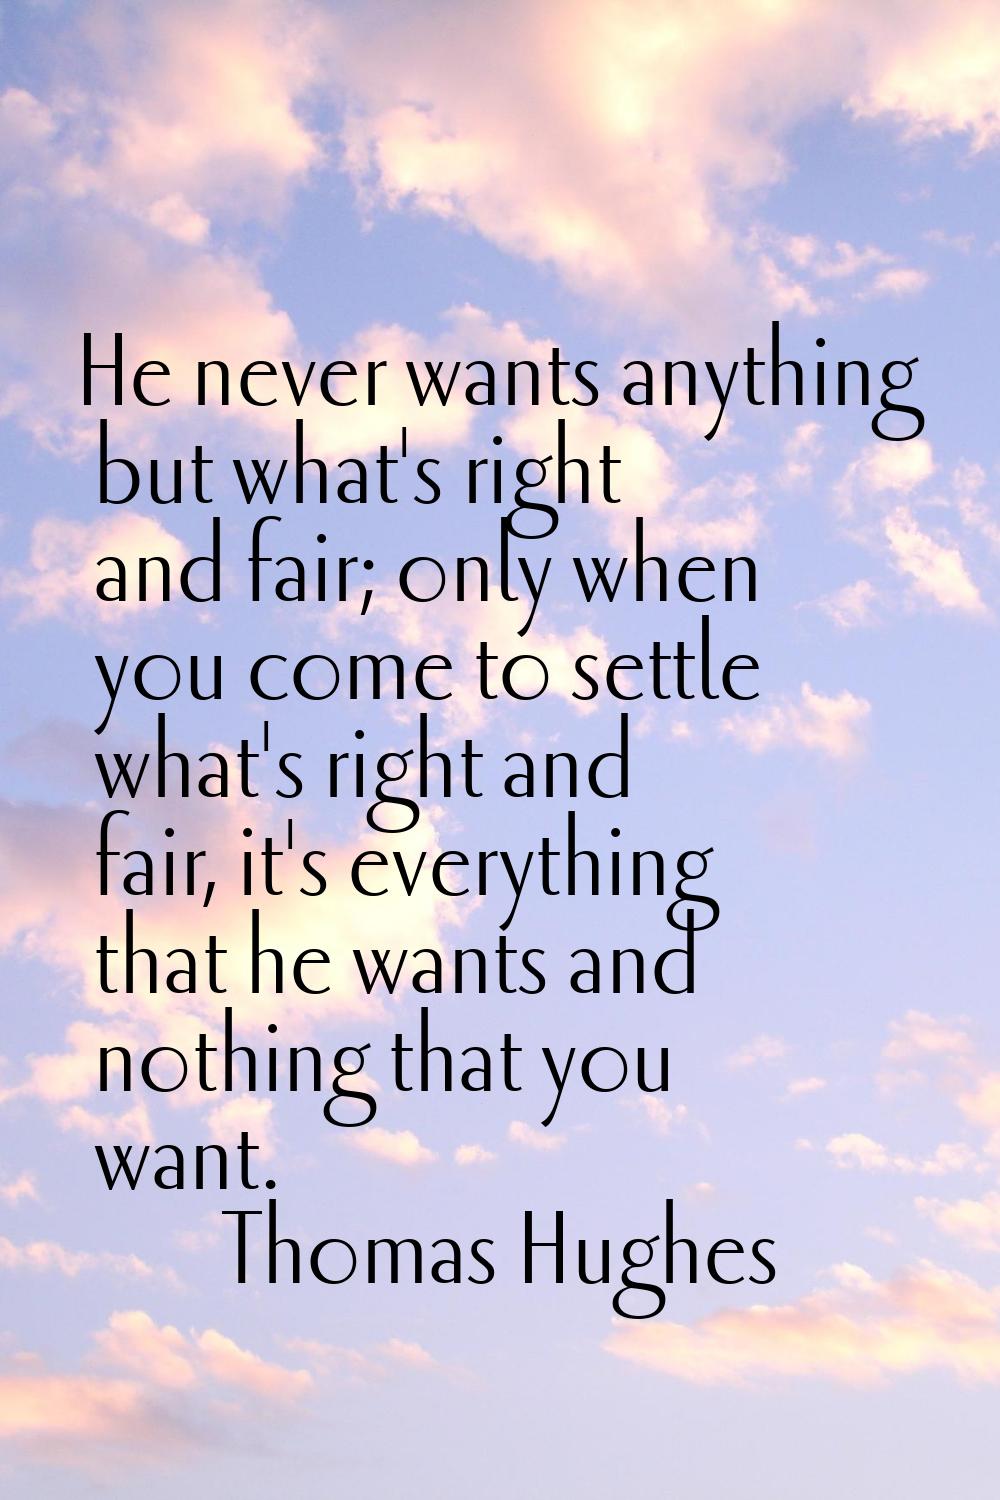 He never wants anything but what's right and fair; only when you come to settle what's right and fa